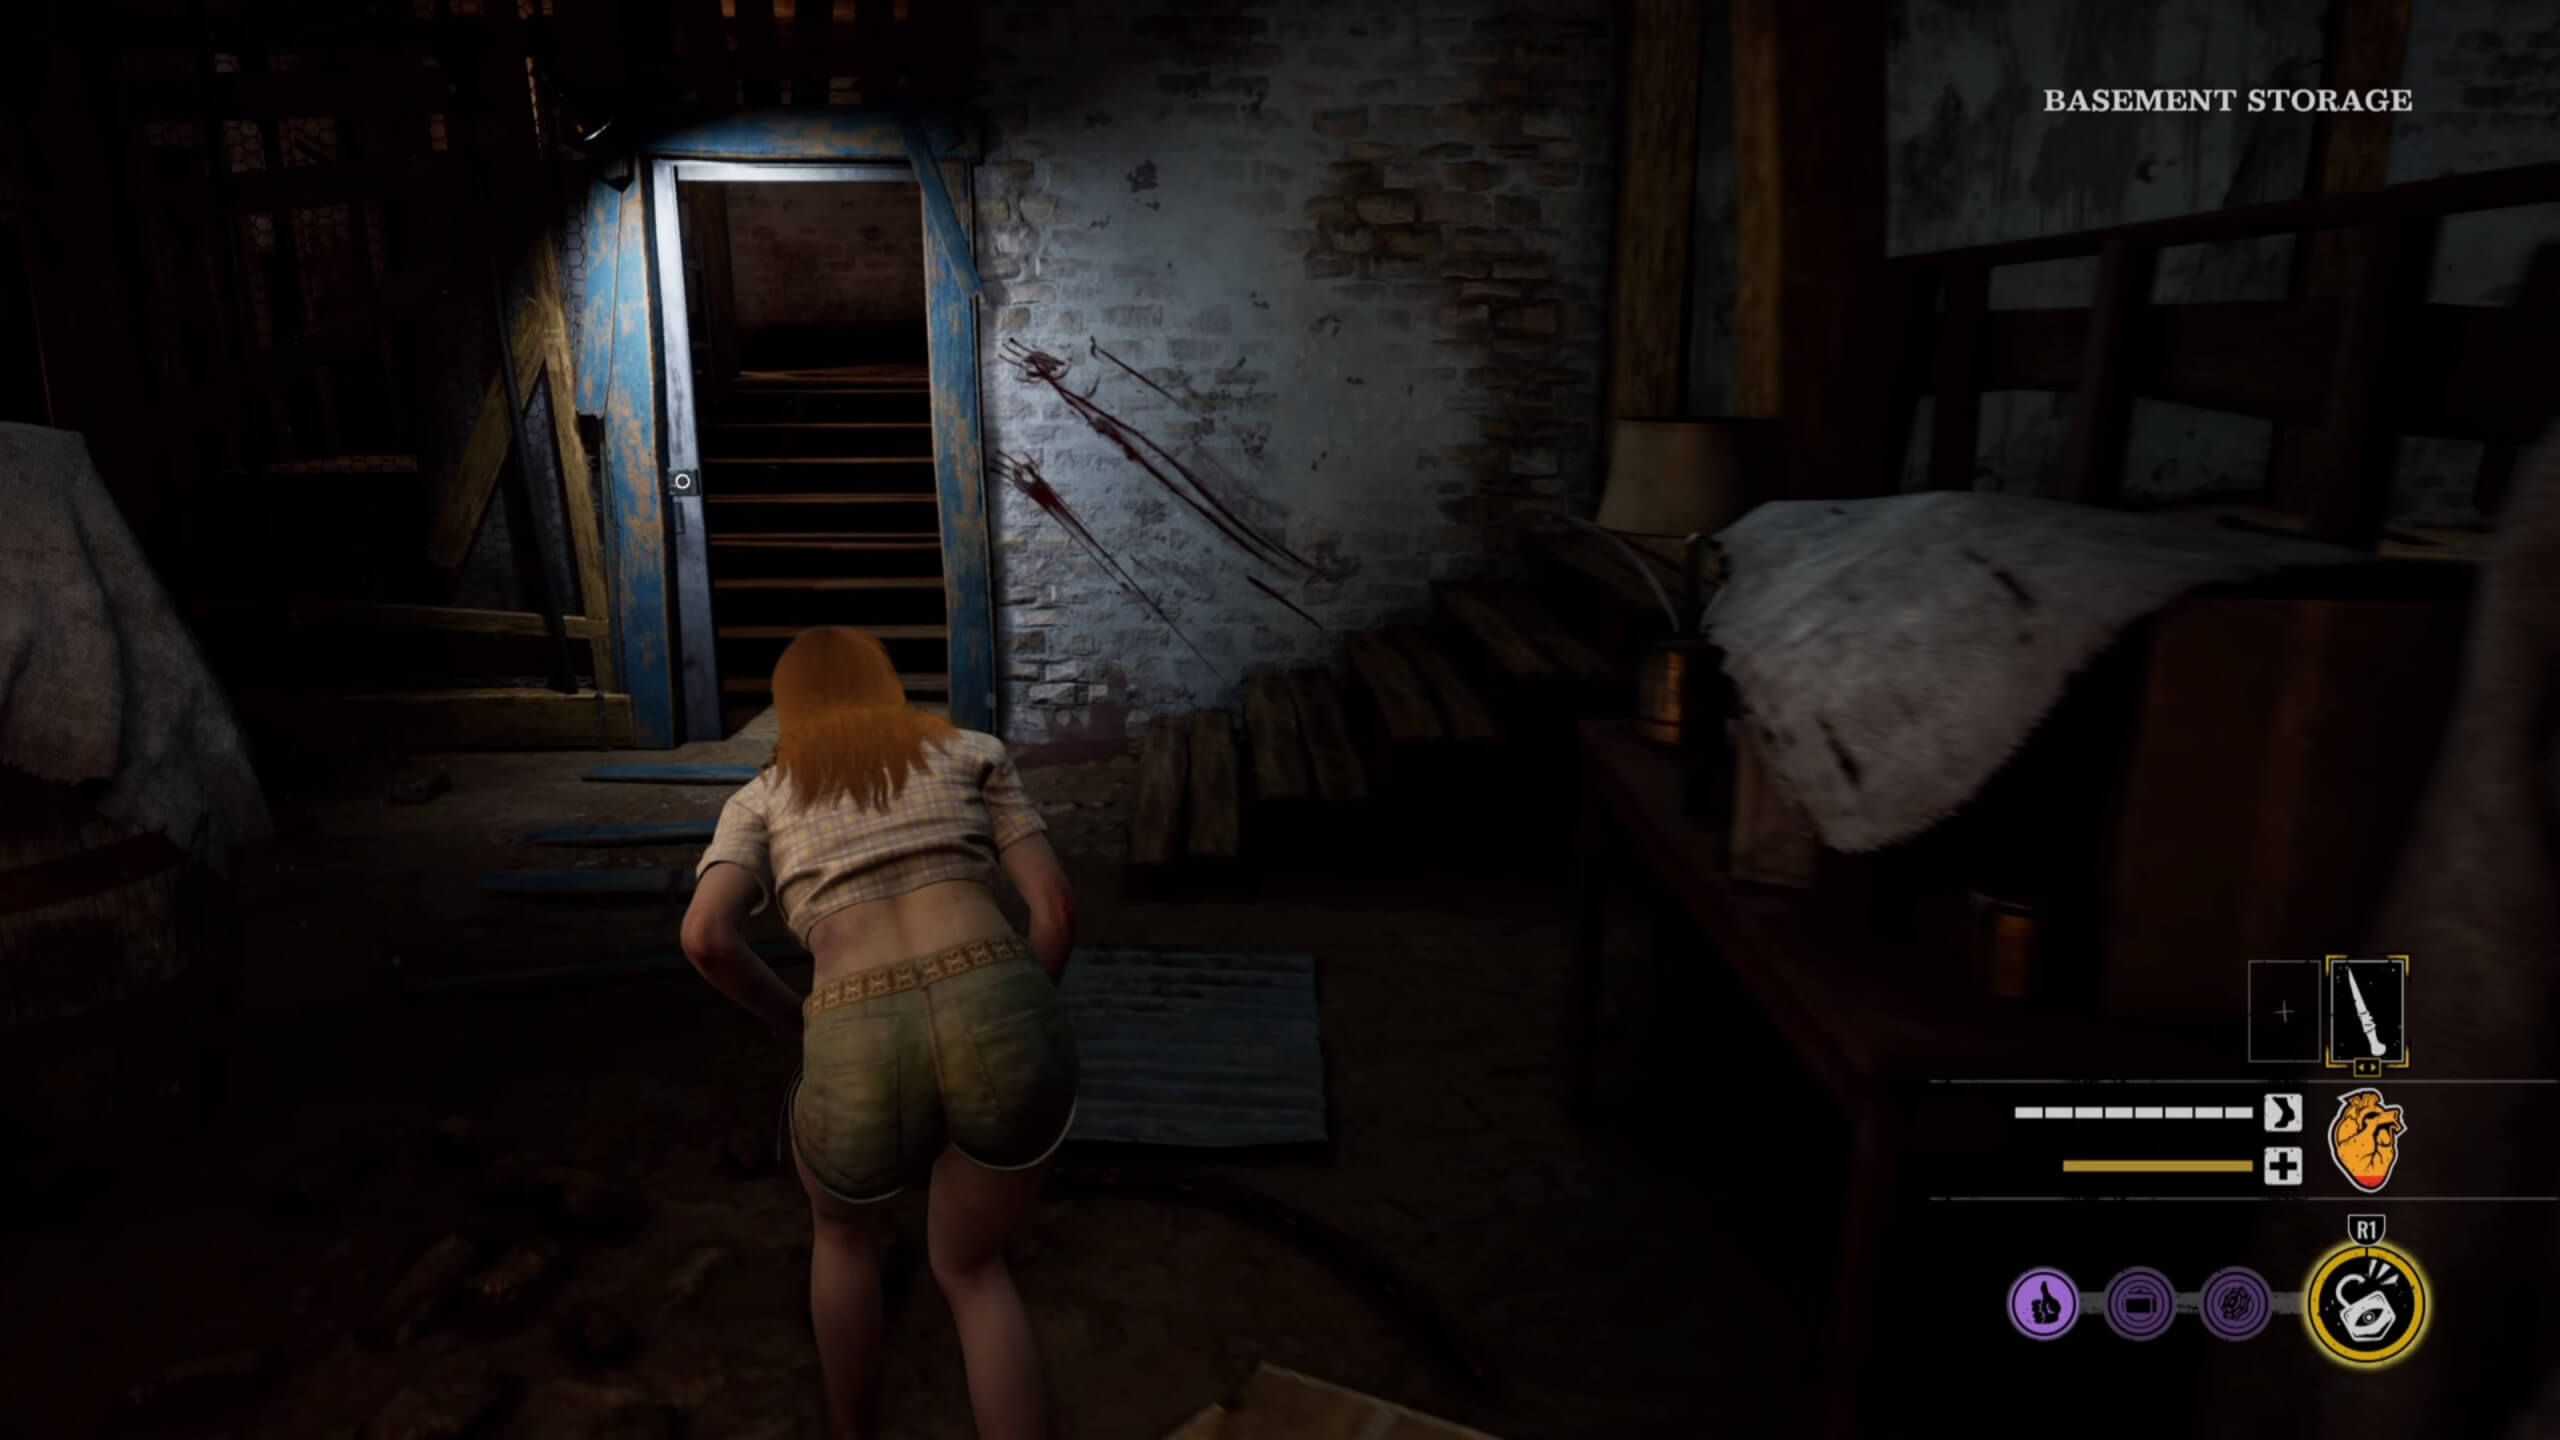 A dark basement, with a door that has been unlocked leading to a set of stairs. Connie who is one of the Victims slowly sneaks towards the stairs through the dark.